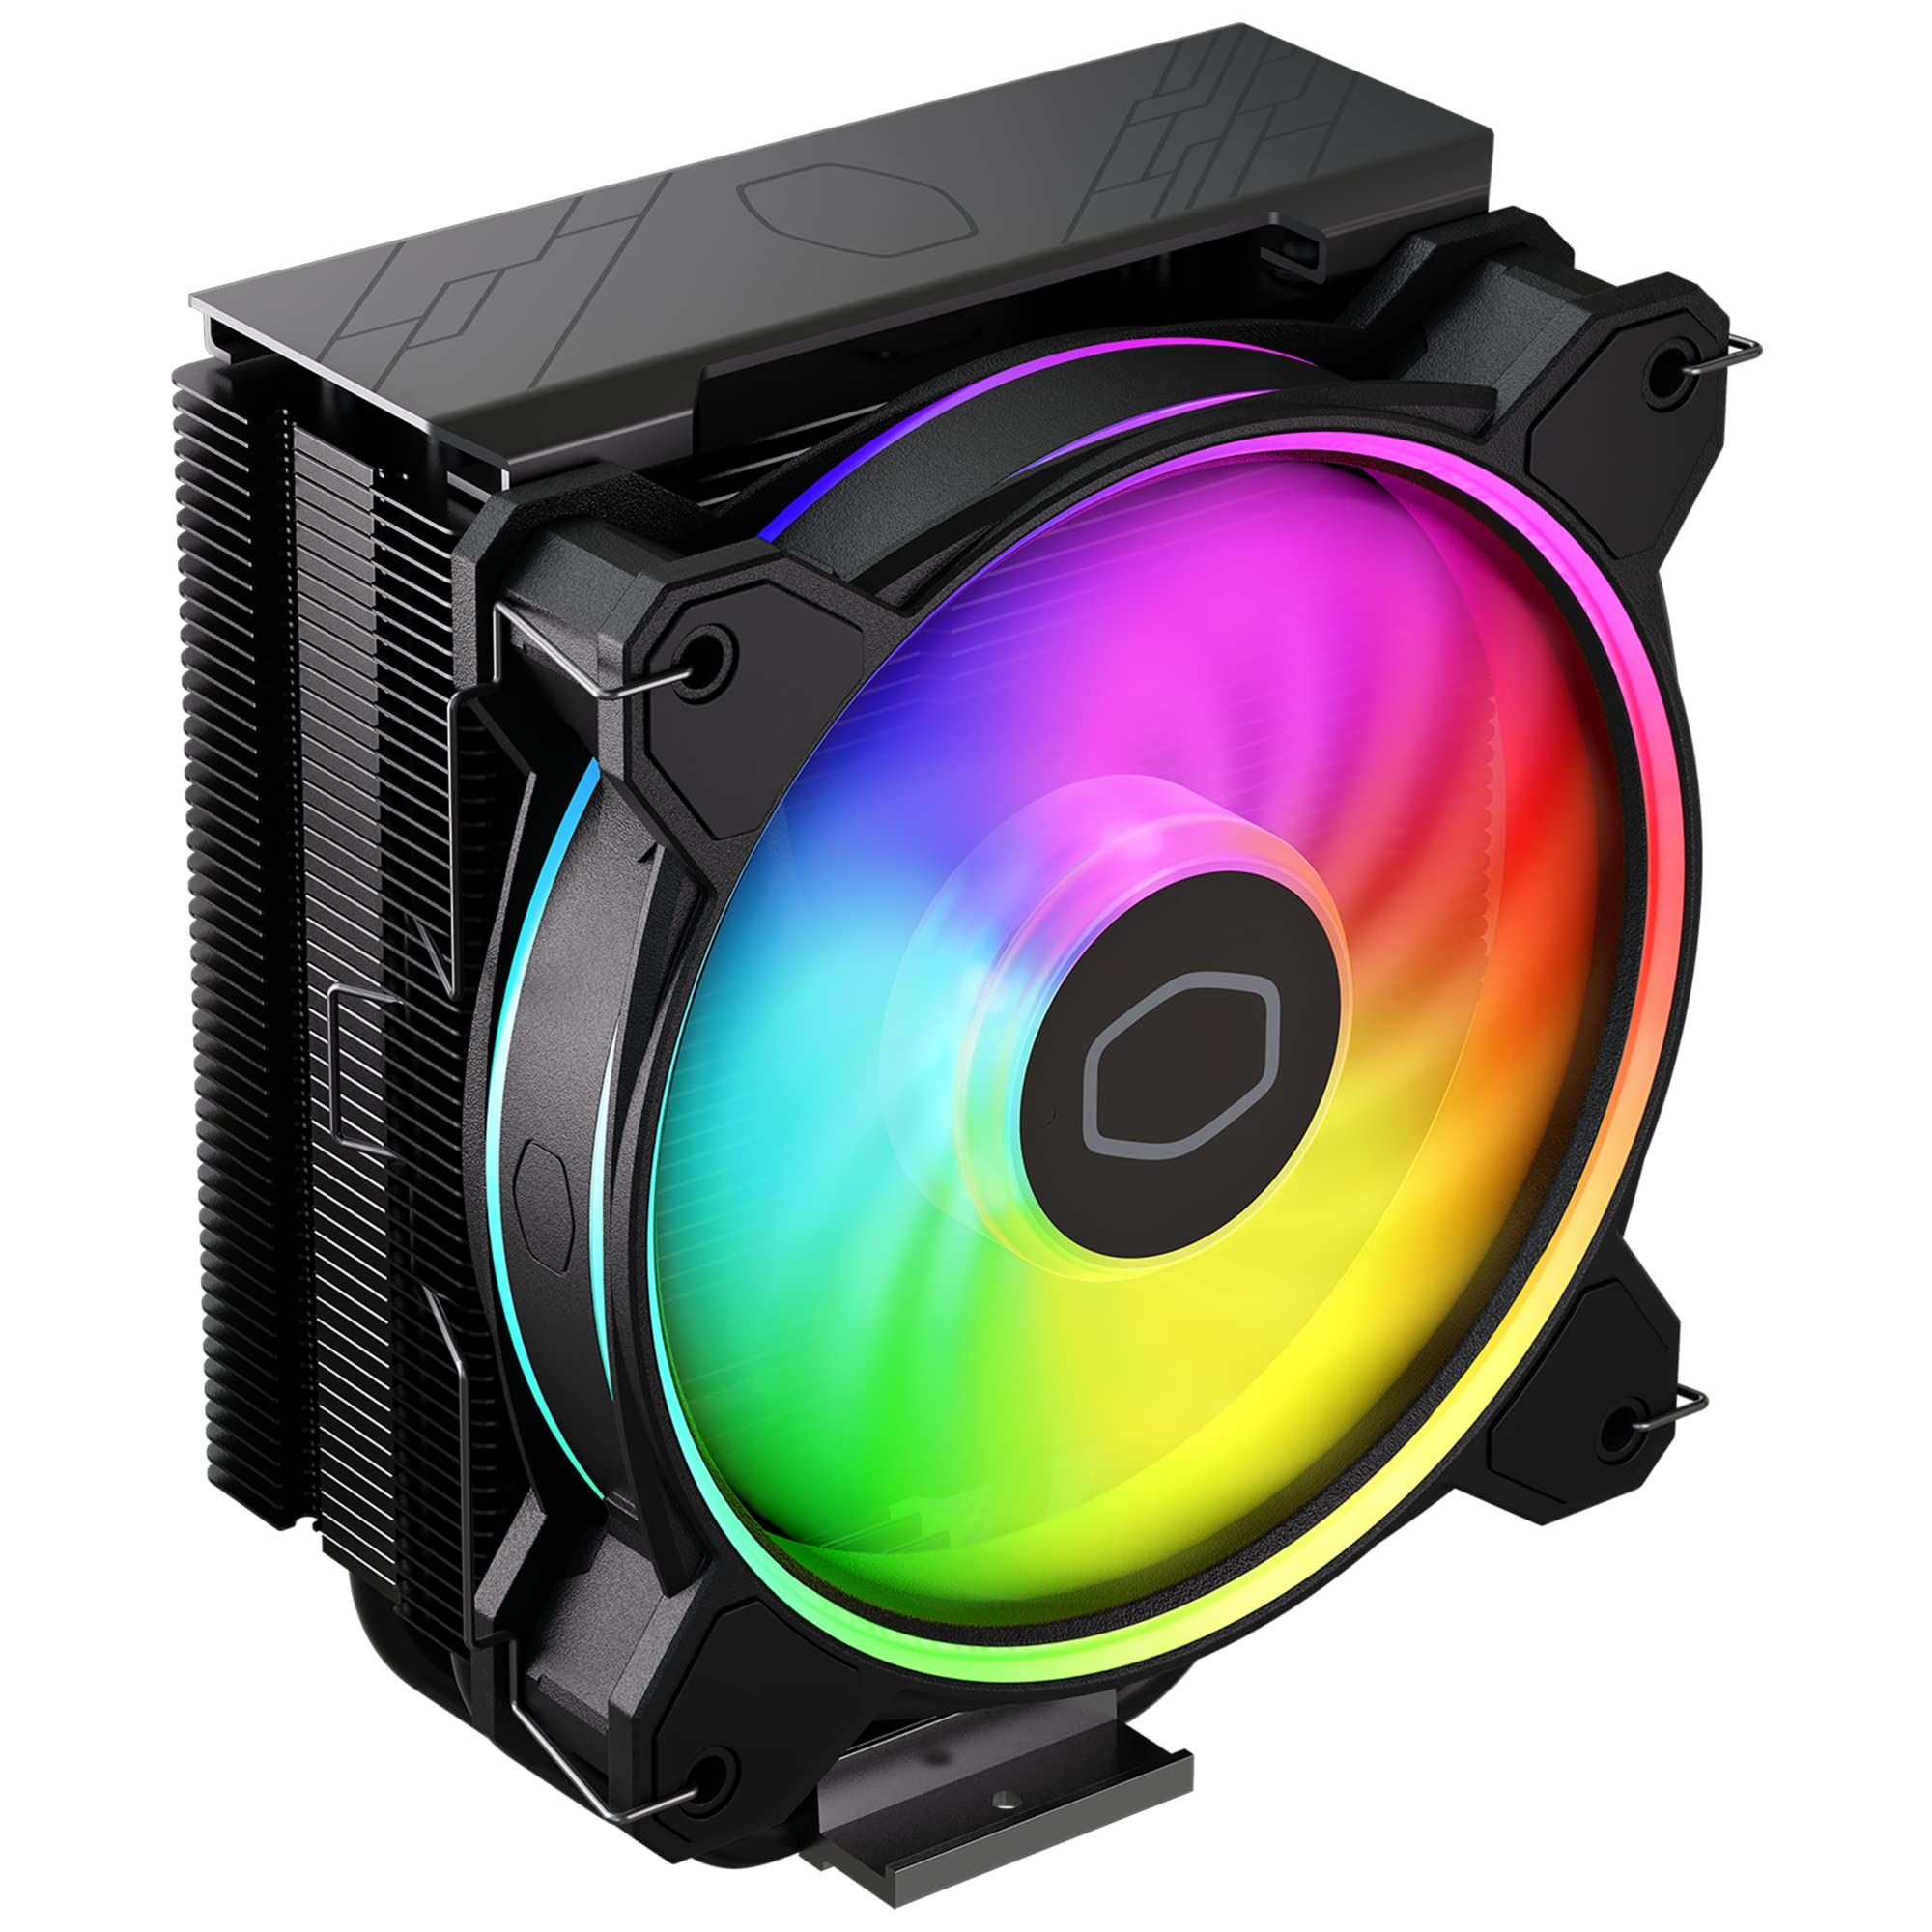 COOLERE Cooler Master Hyper 212 Halo Black, 4HP,Halo2 12025 ARGB ,Black Paint Heat Pipe,Black Cover,PWM,w/o controller, 